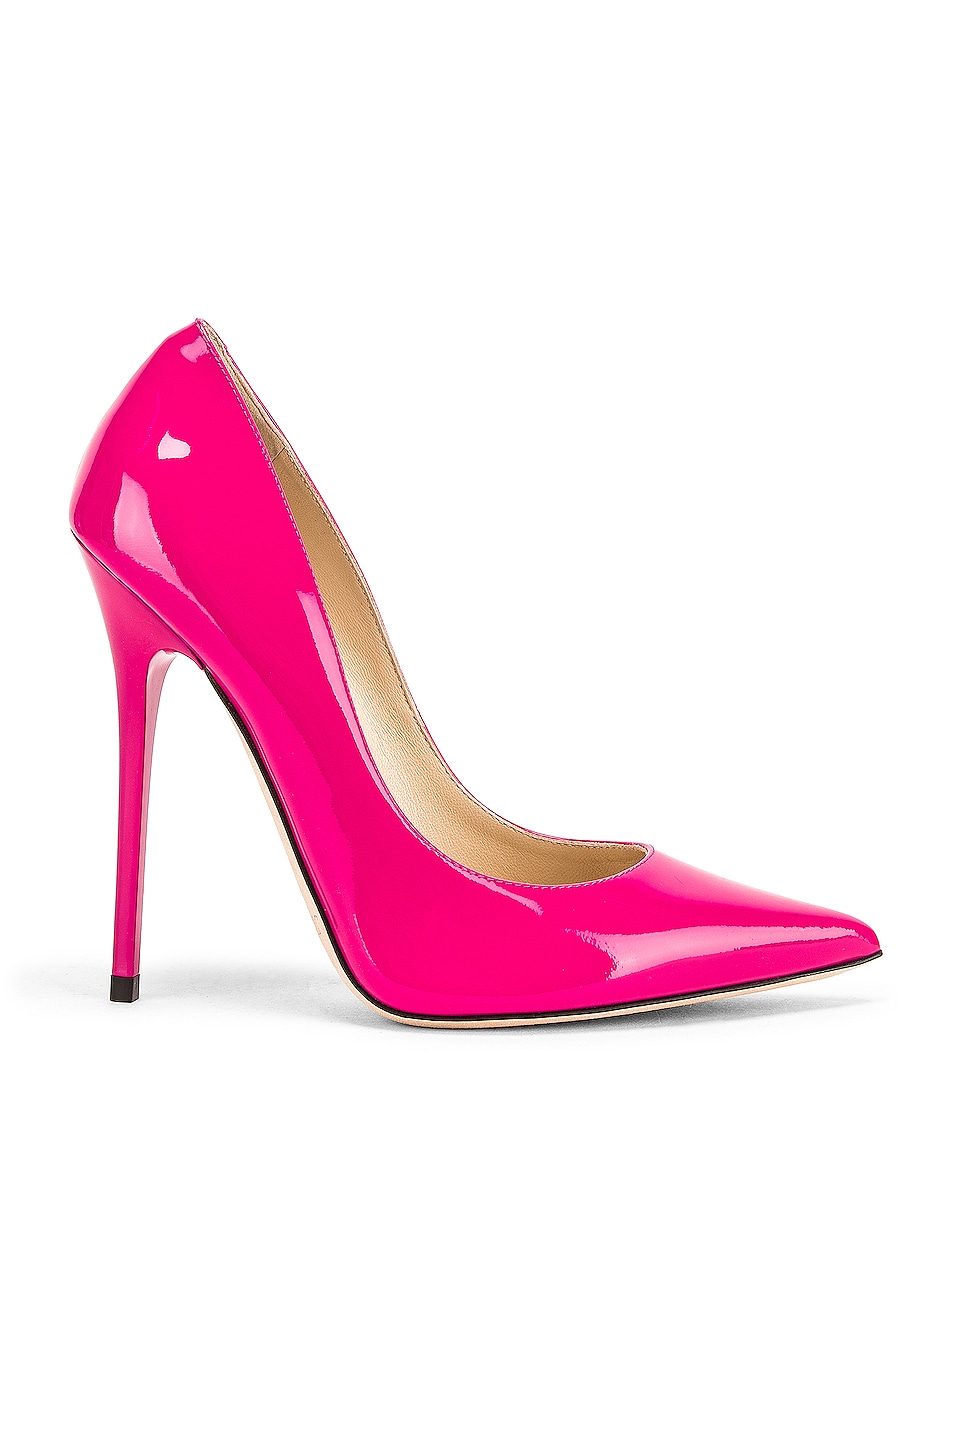 Image 1 of Jimmy Choo for FWRD Anouk 120 Patent Heel in Hot Pink